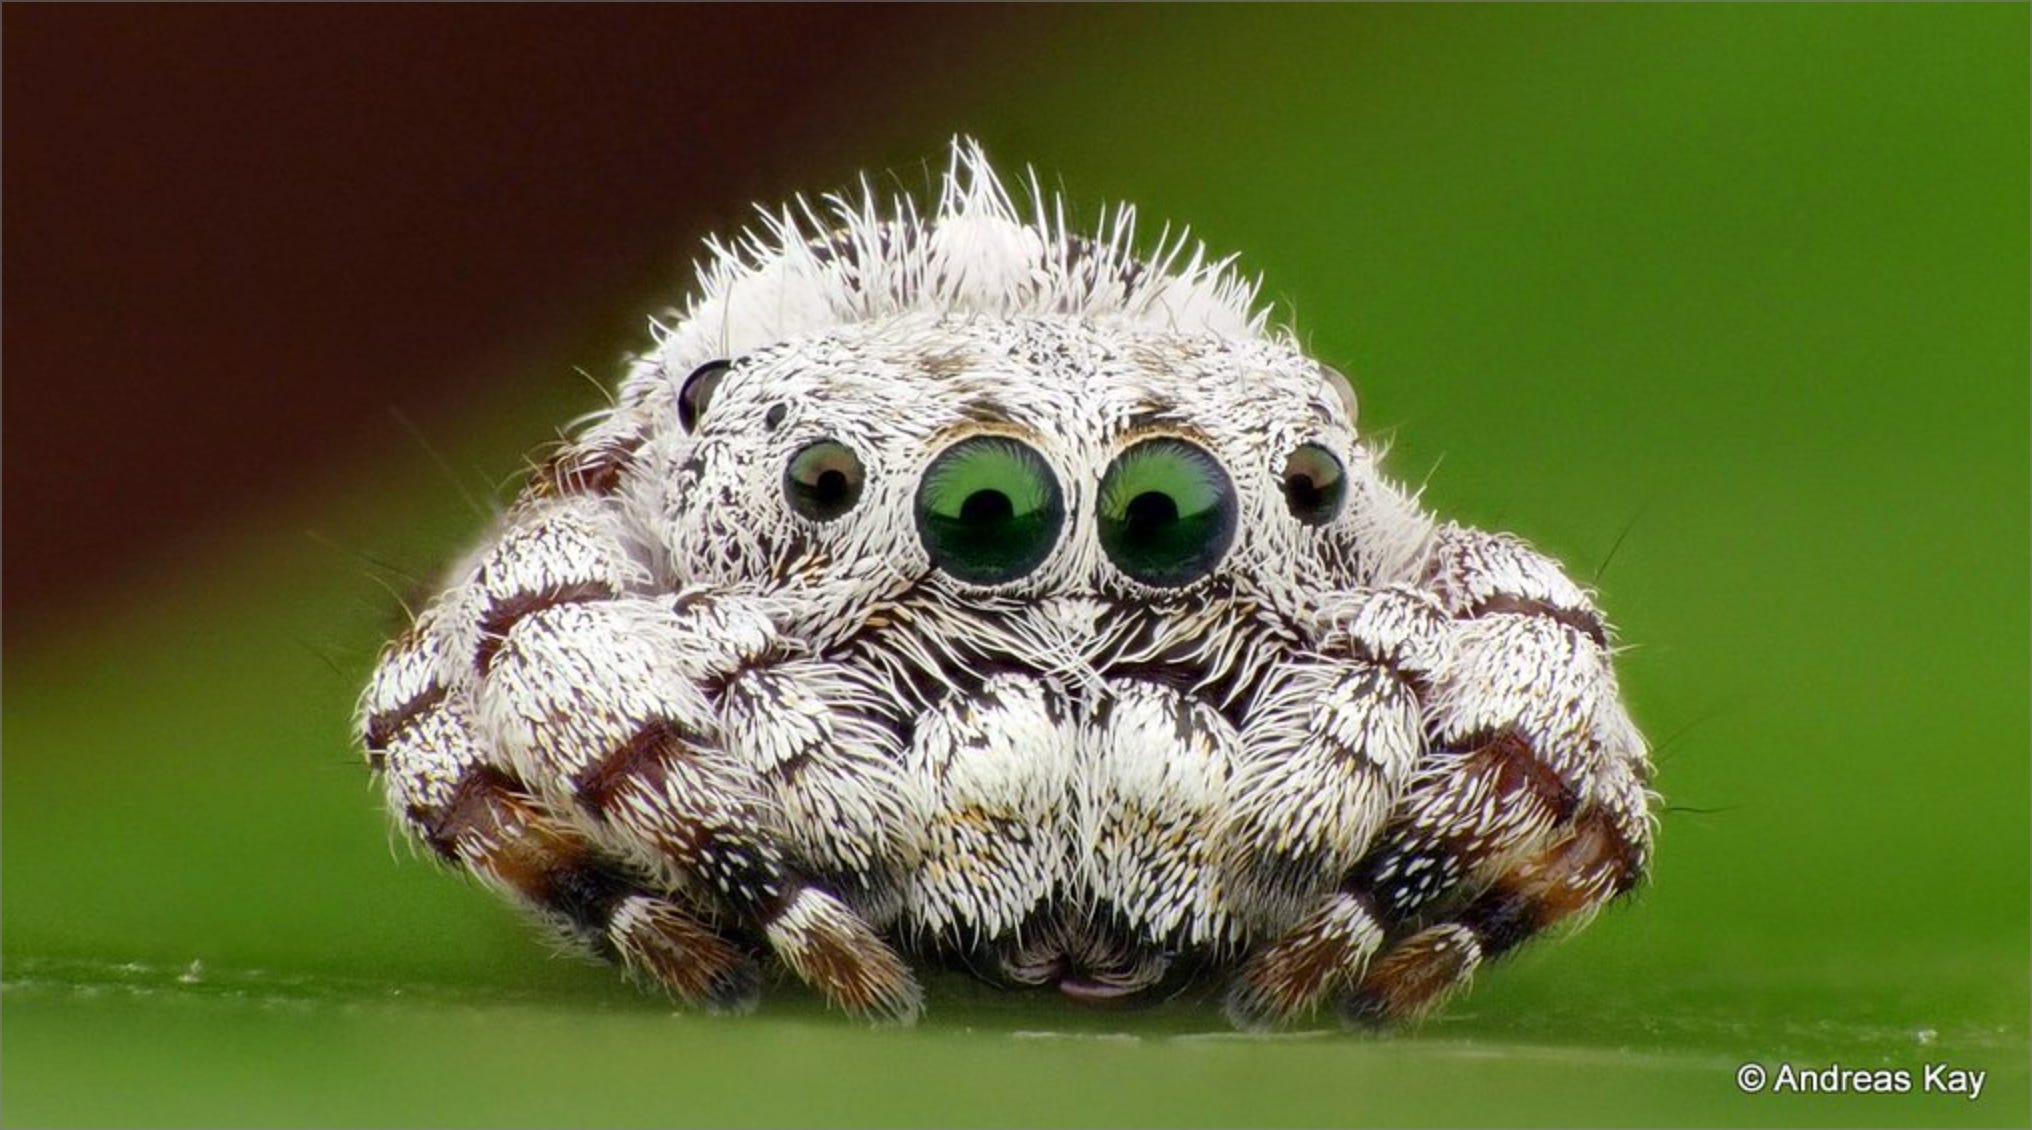 Leap Into the World of Jumping Spiders - Science Friday